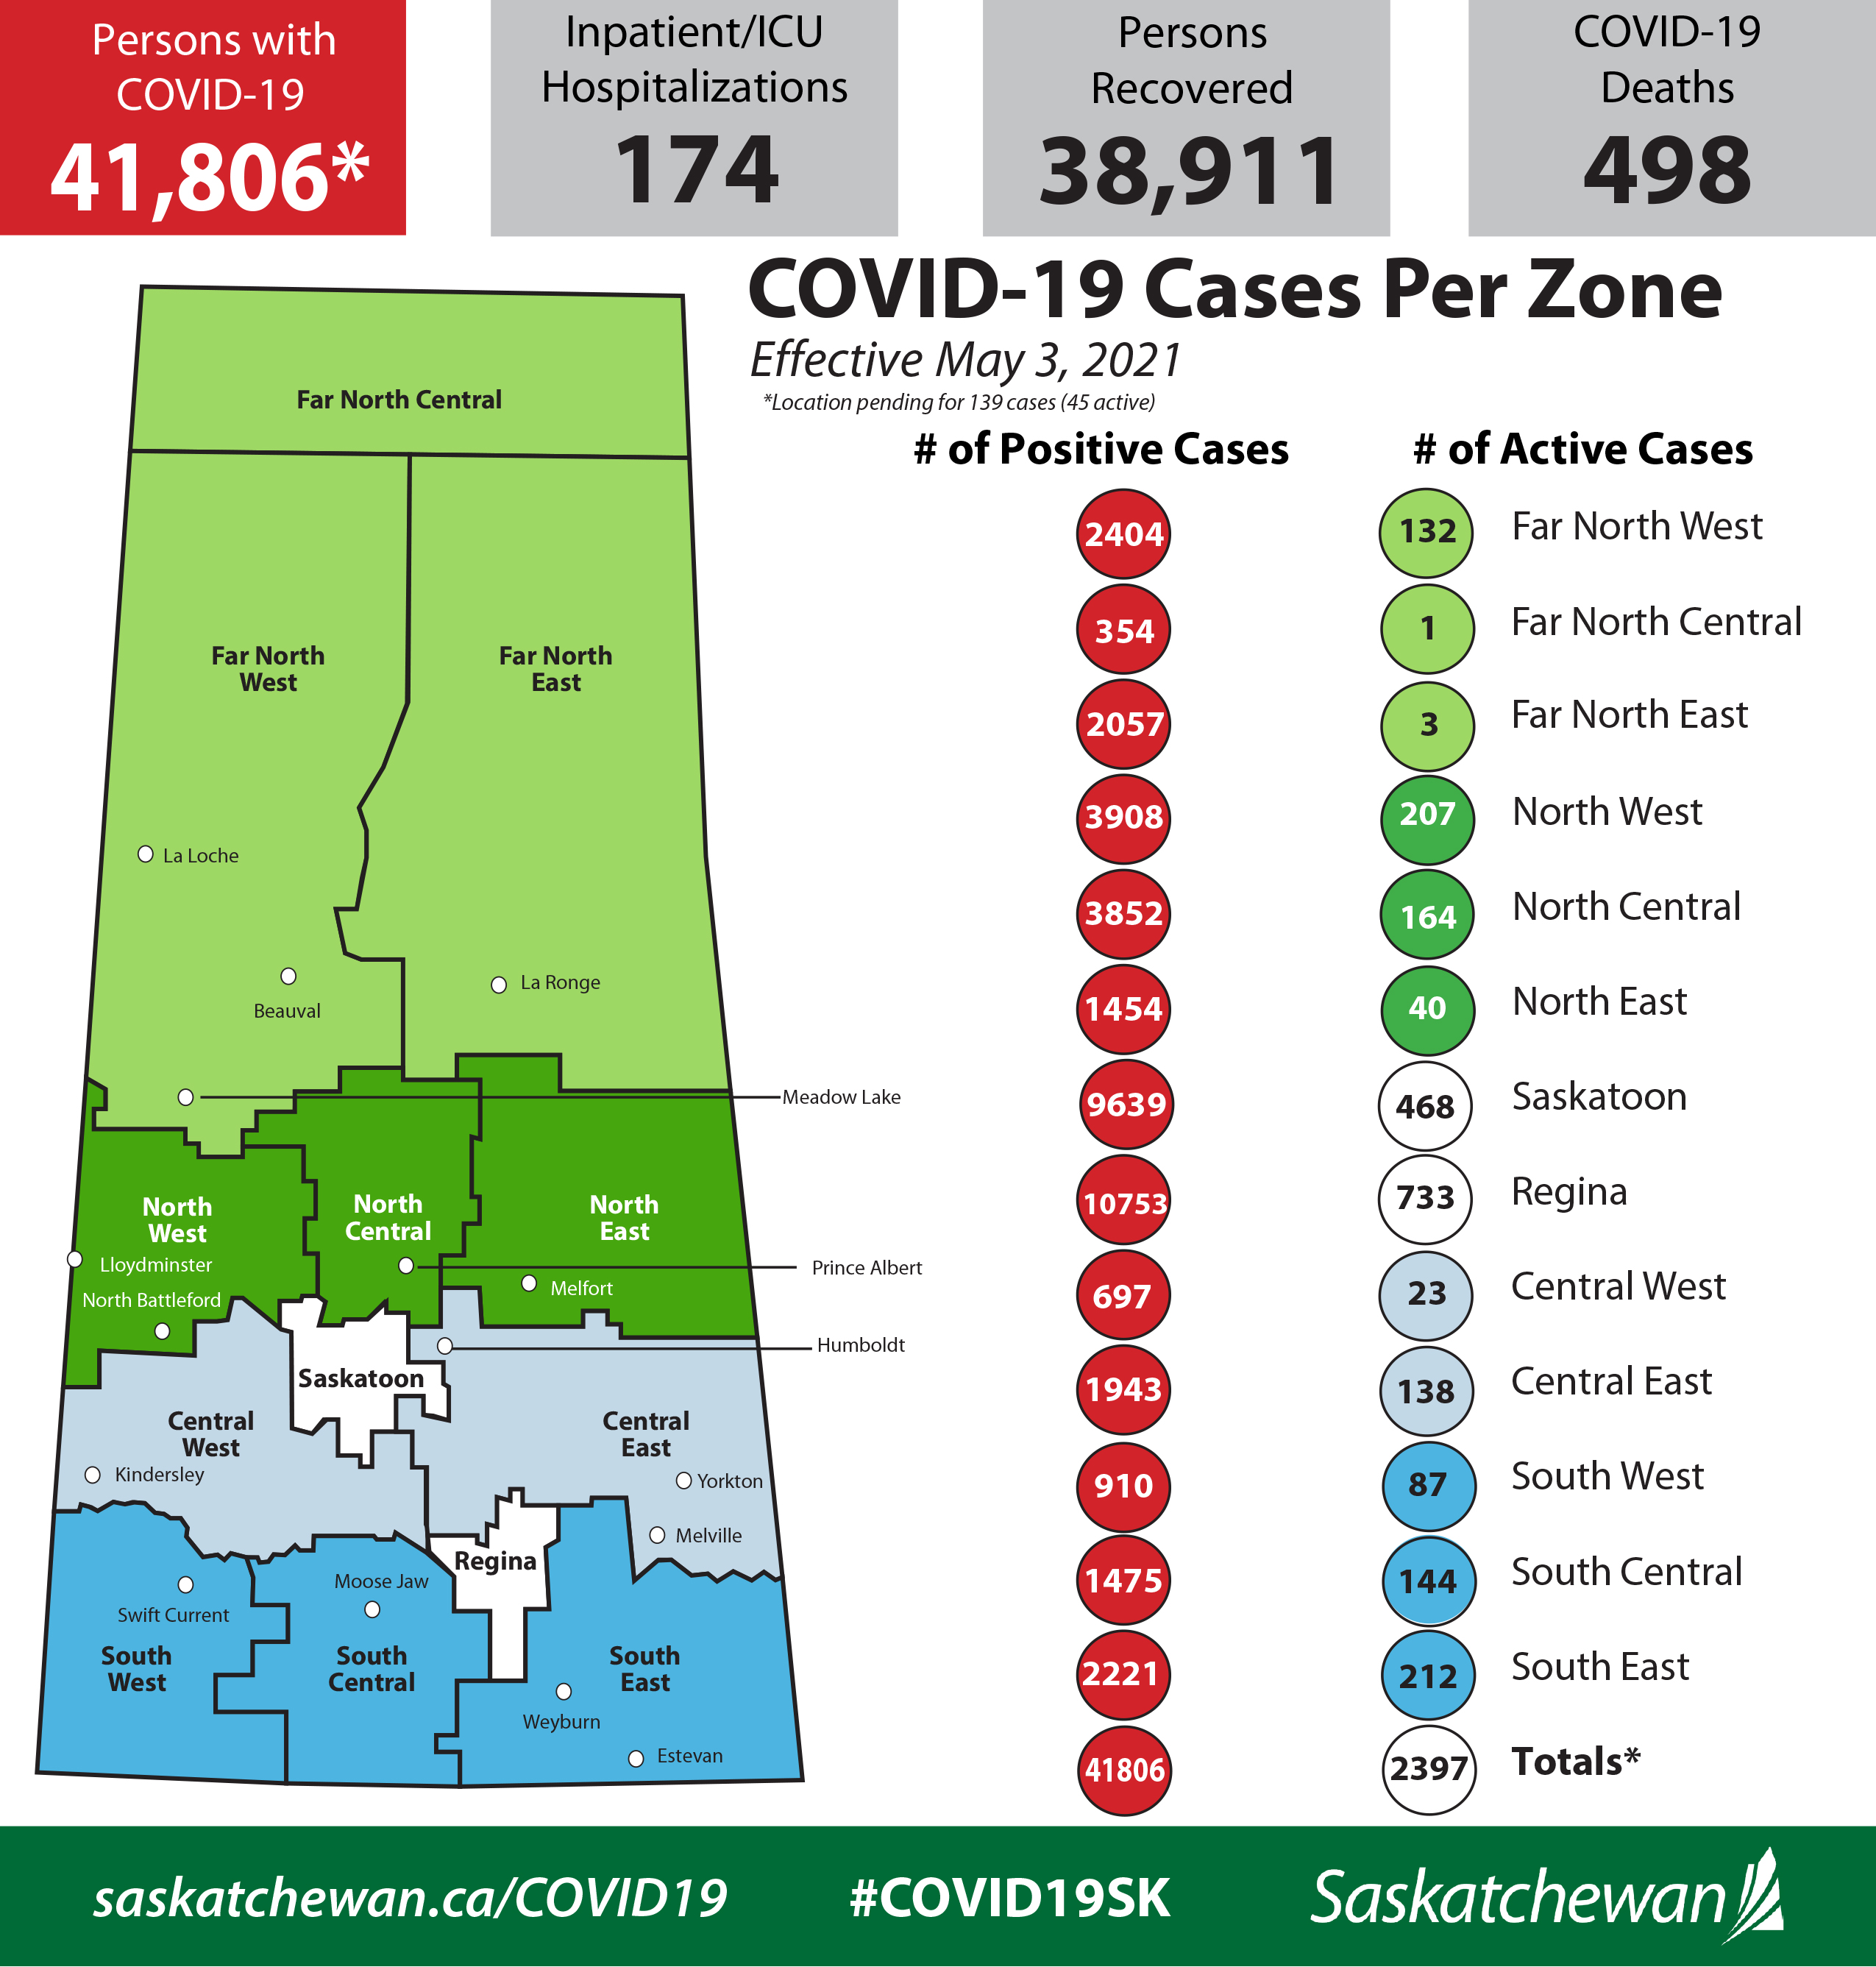 COVID-19 Update for May 3: 450,823 Vaccines Administered, 207 New Cases, 244 Recoveries, 174 in Hospital, Three New Deaths

Current 7-Day Average: 230 (18.8 per 100,000).

Full details: https://www.saskatchewan.ca/government/news-and-media/2021/may/03/covid19-update-for-may-3-450823-vaccines-administered-207-new-cases-244-recoveries-three-new-deaths

COVID-19 Dashboard: https://dashboard.saskatchewan.ca/health-wellness